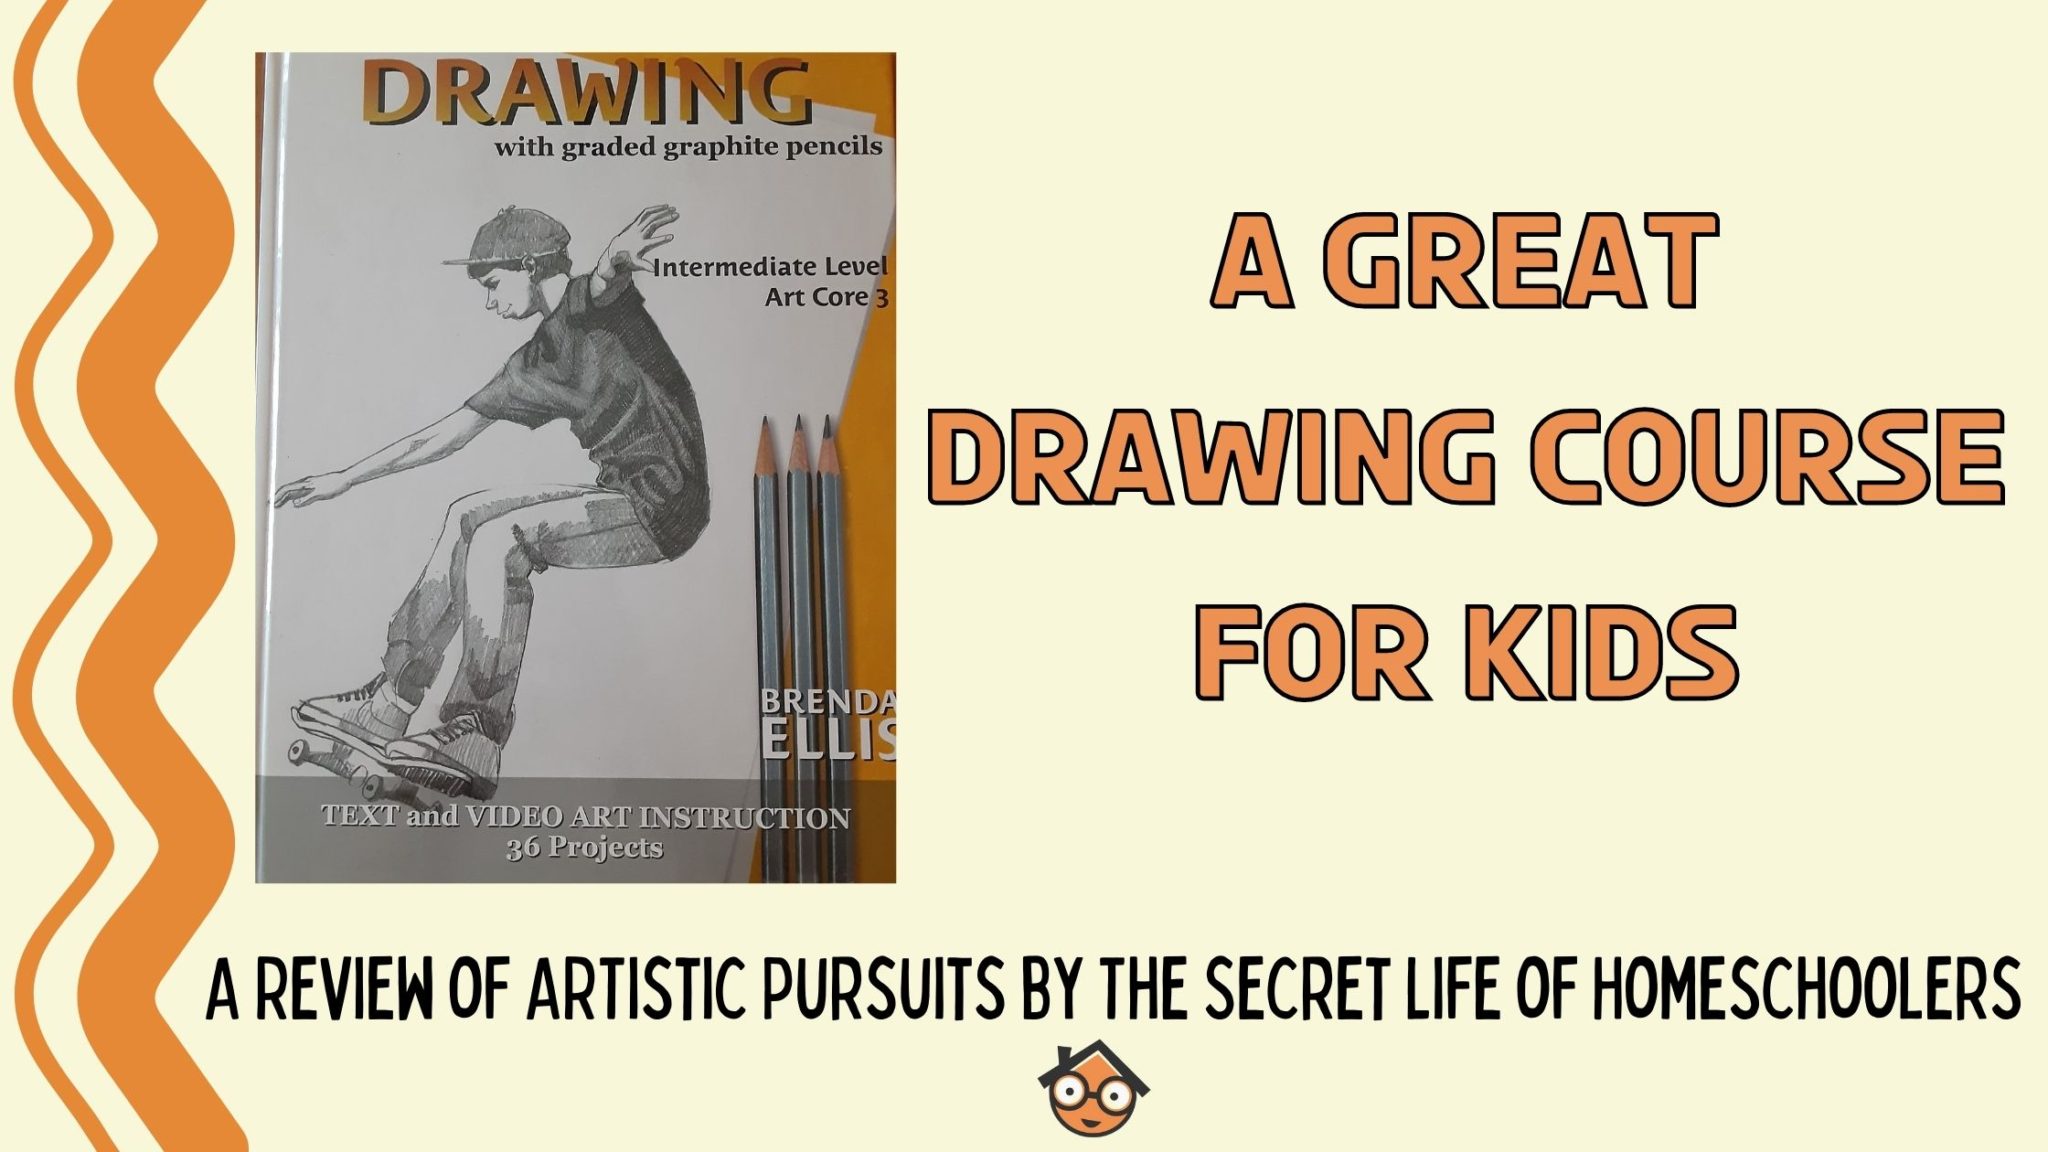 You are currently viewing A Great Drawing Course for Kids: An ARTistic Pursuits Review